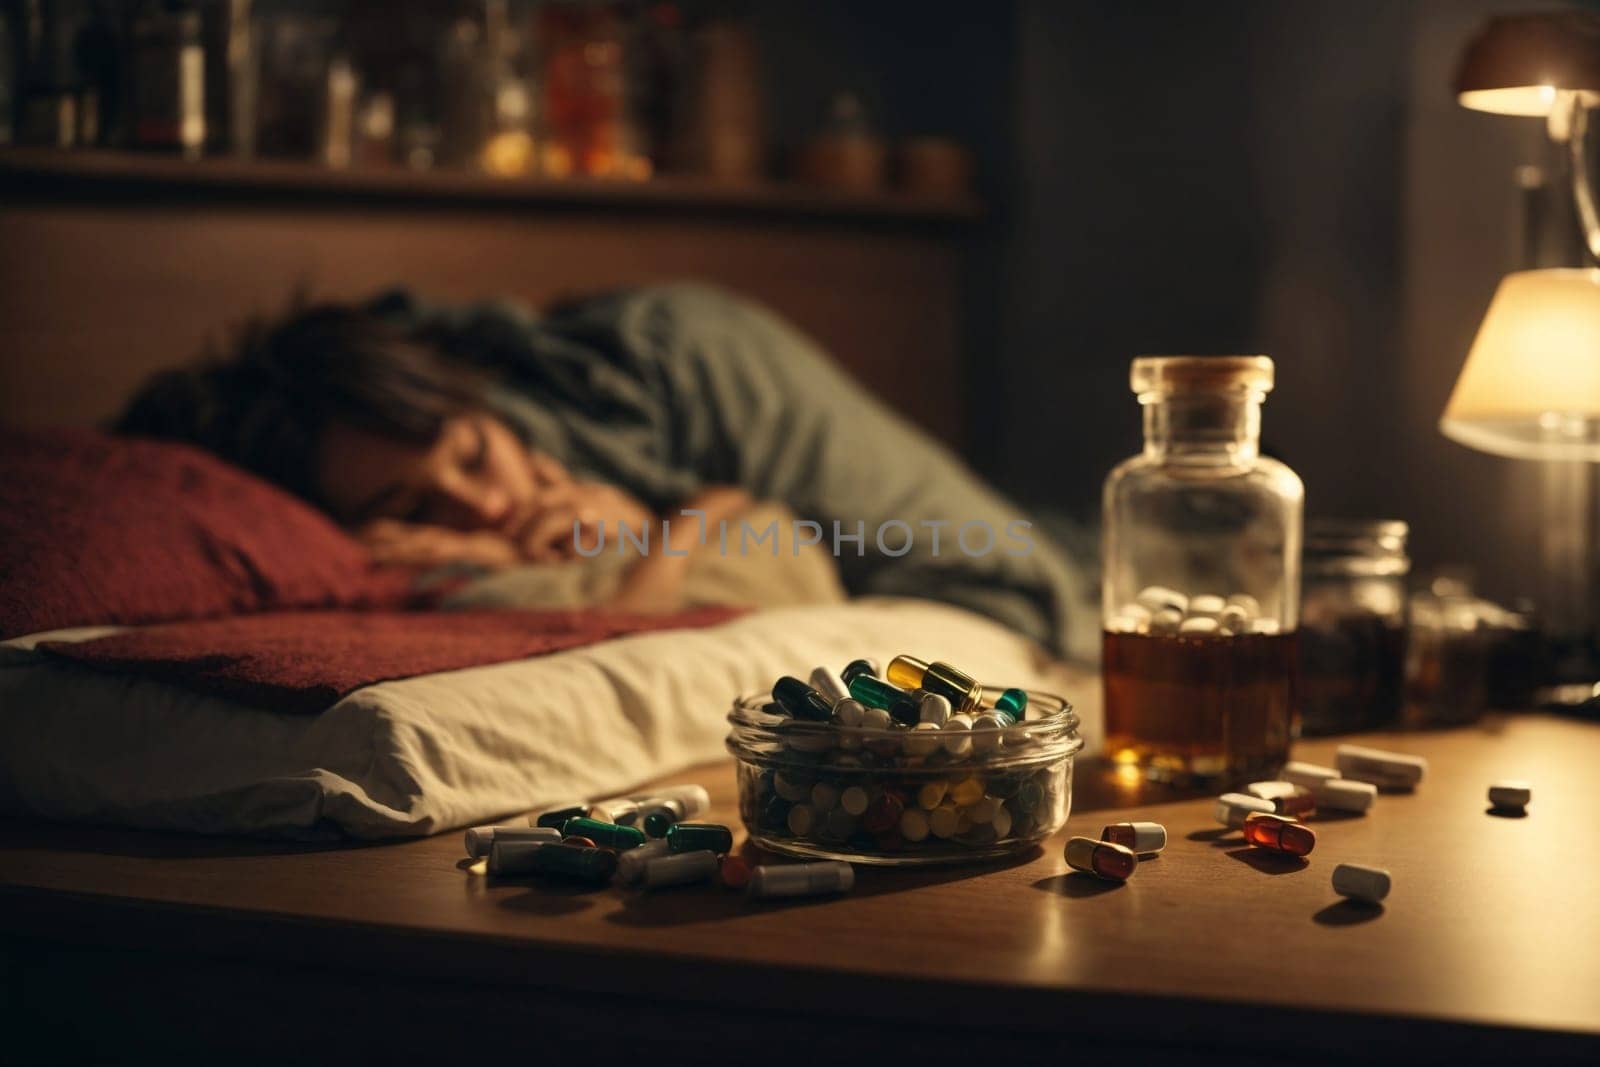 A woman reclines in a bed next to a bottle of pills.